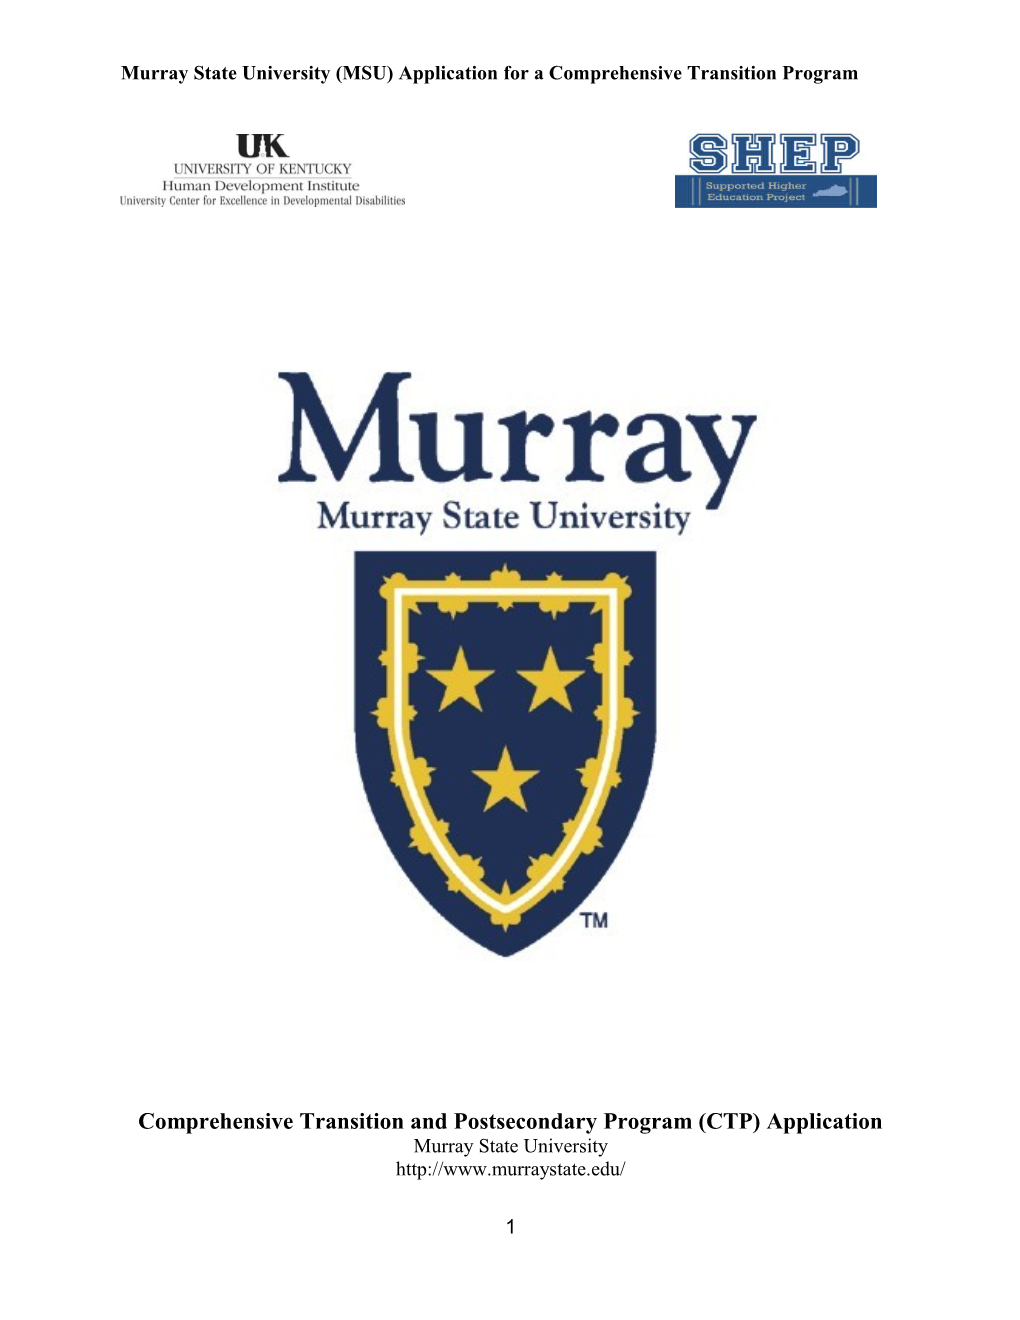 Murray State University (MSU)Application for a Comprehensive Transition Program